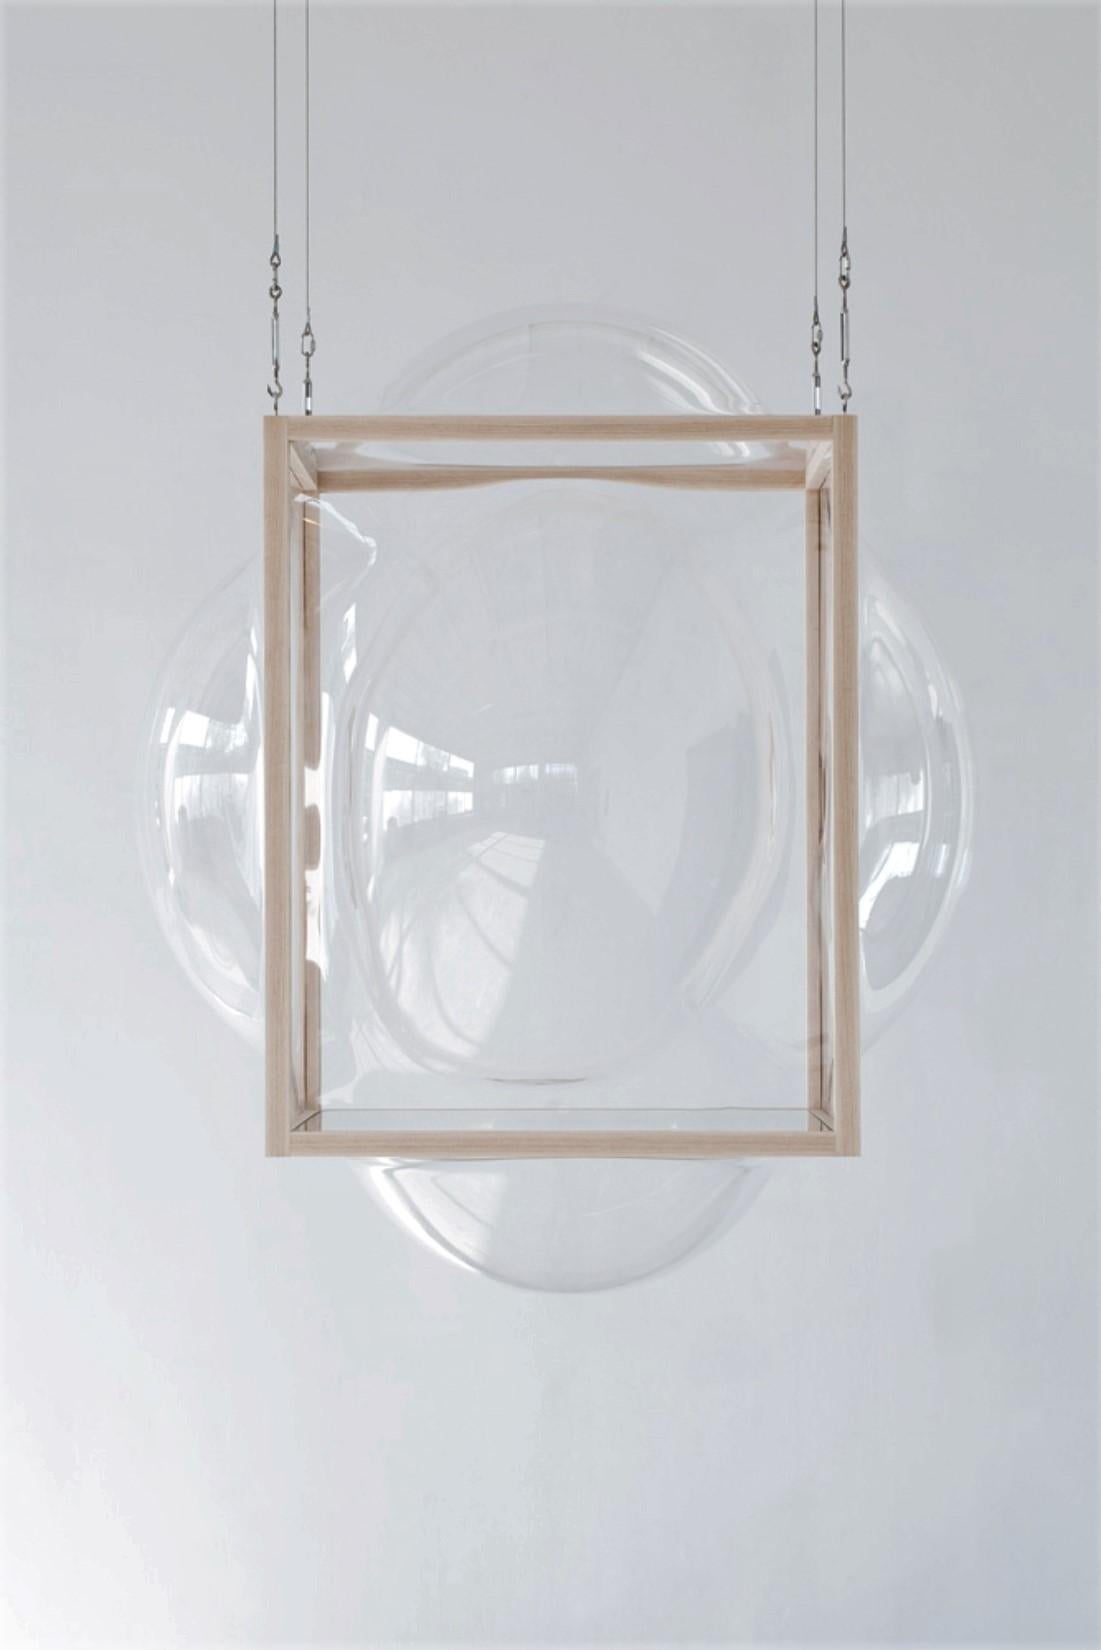 Large hanging curator bubble Cabinet by Studio Thier & van Daalen
Dimensions: W 115 x D 115 x H 120 cm
Materials: Ash, Acrylic glass, glass
Also available: Extra options available

These bubbles in a wooden frame brighten up your day! As if